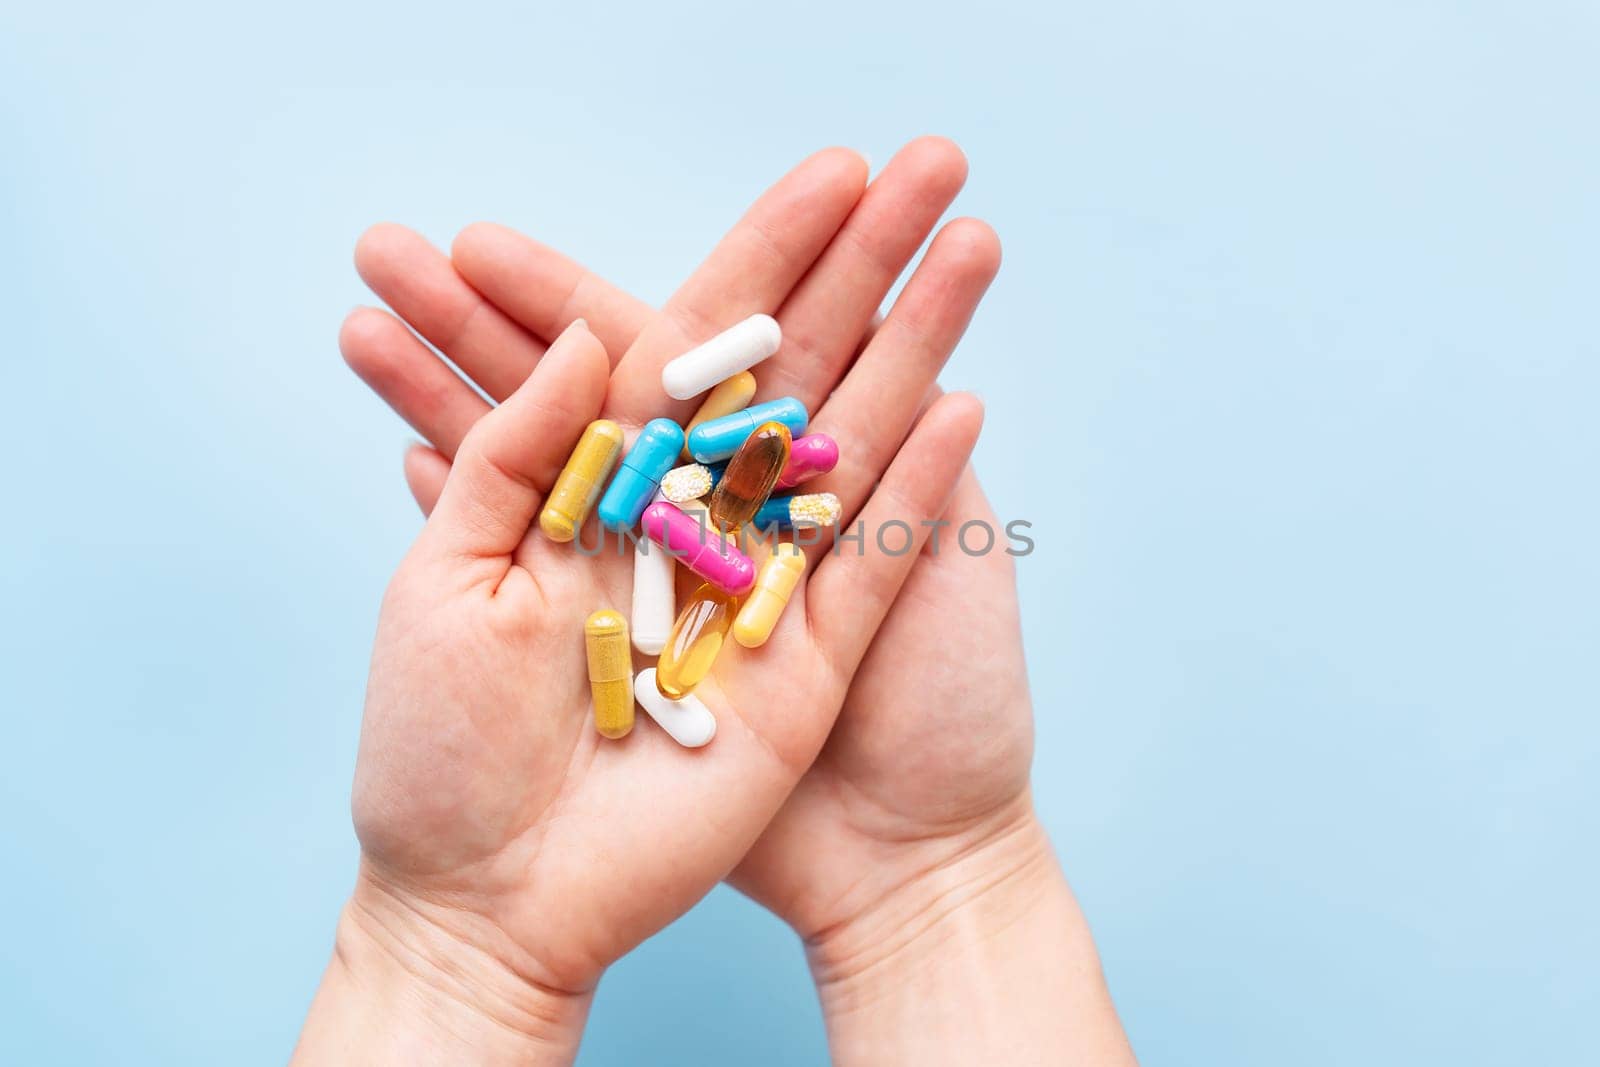 The girl holds a handful of brightly colored vitamins, nutritional supplements, and medicines in her palms. Concept of medicine and health support